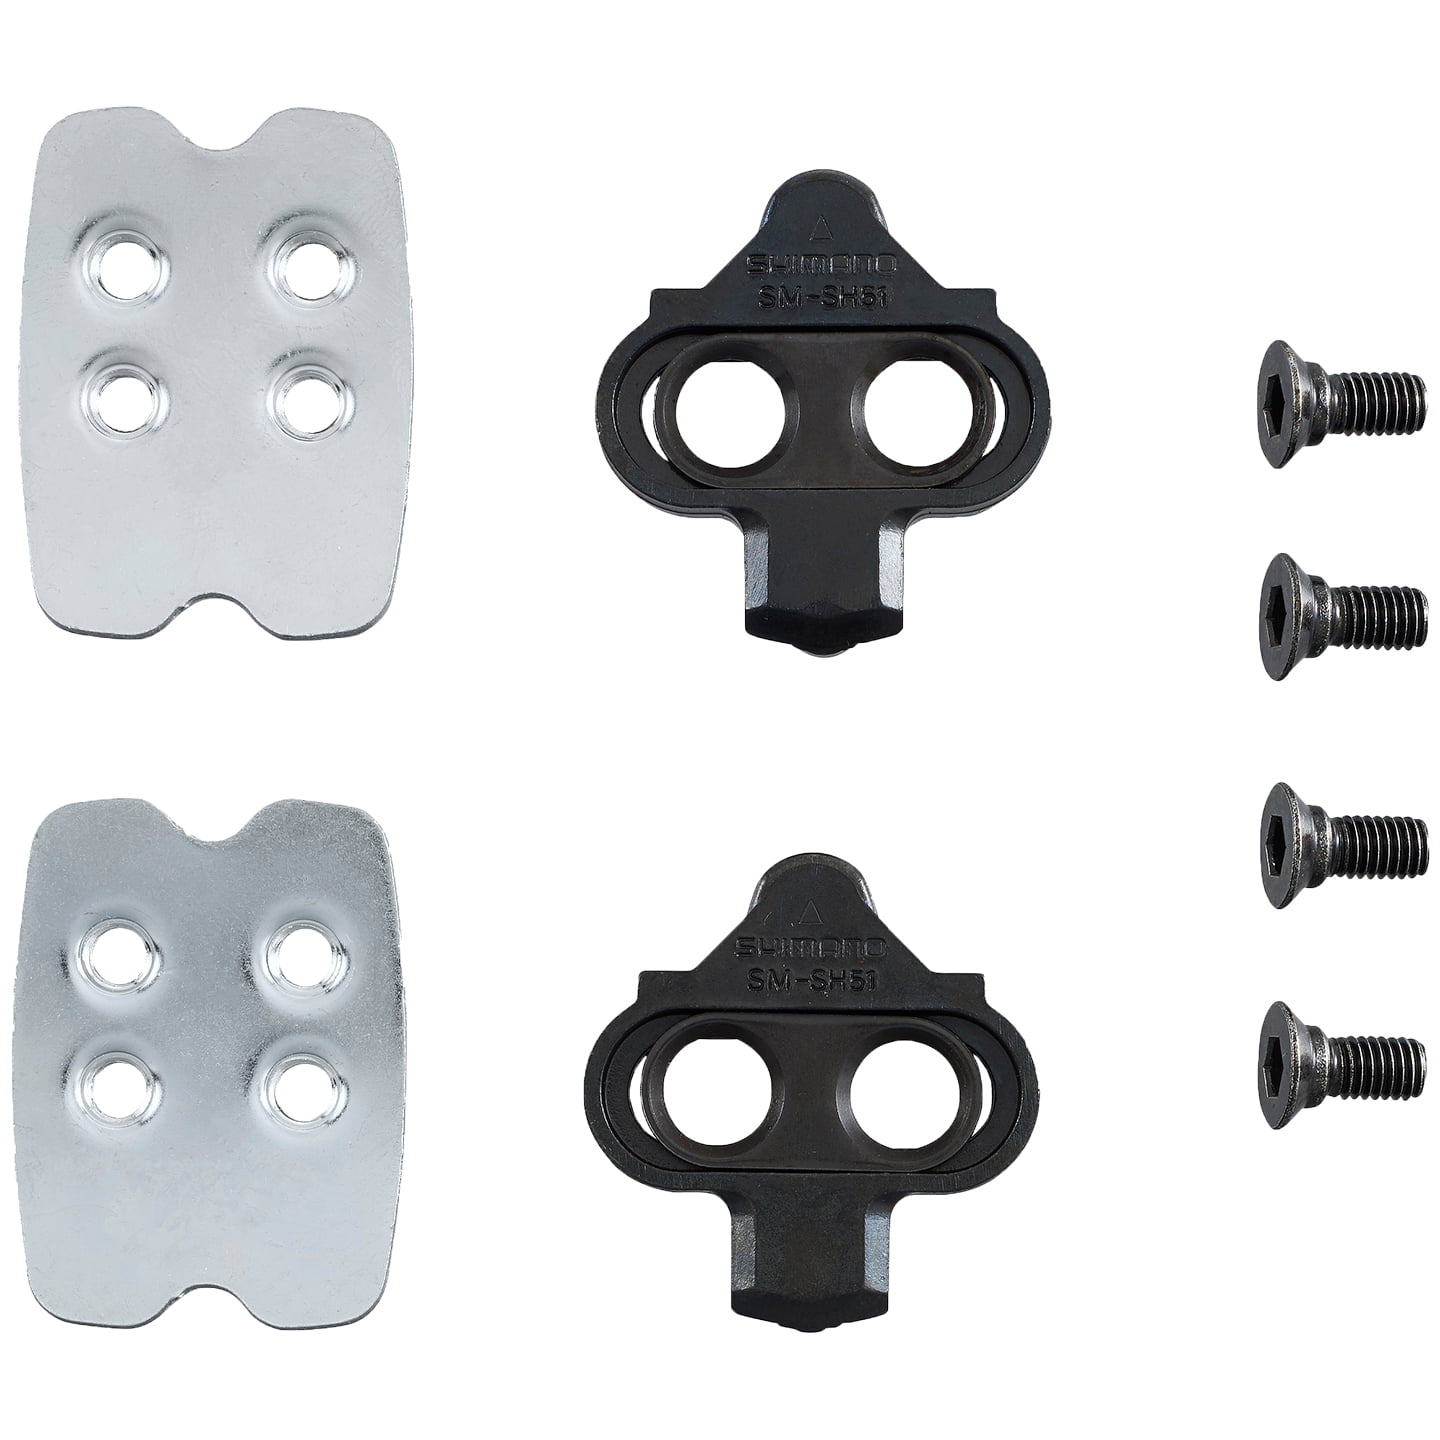 SHIMANO SPD Pedal Plates MTB SM-SH51 with Counter Plates Pedal Cleats for MTB, Bike pedal, Bike accessories